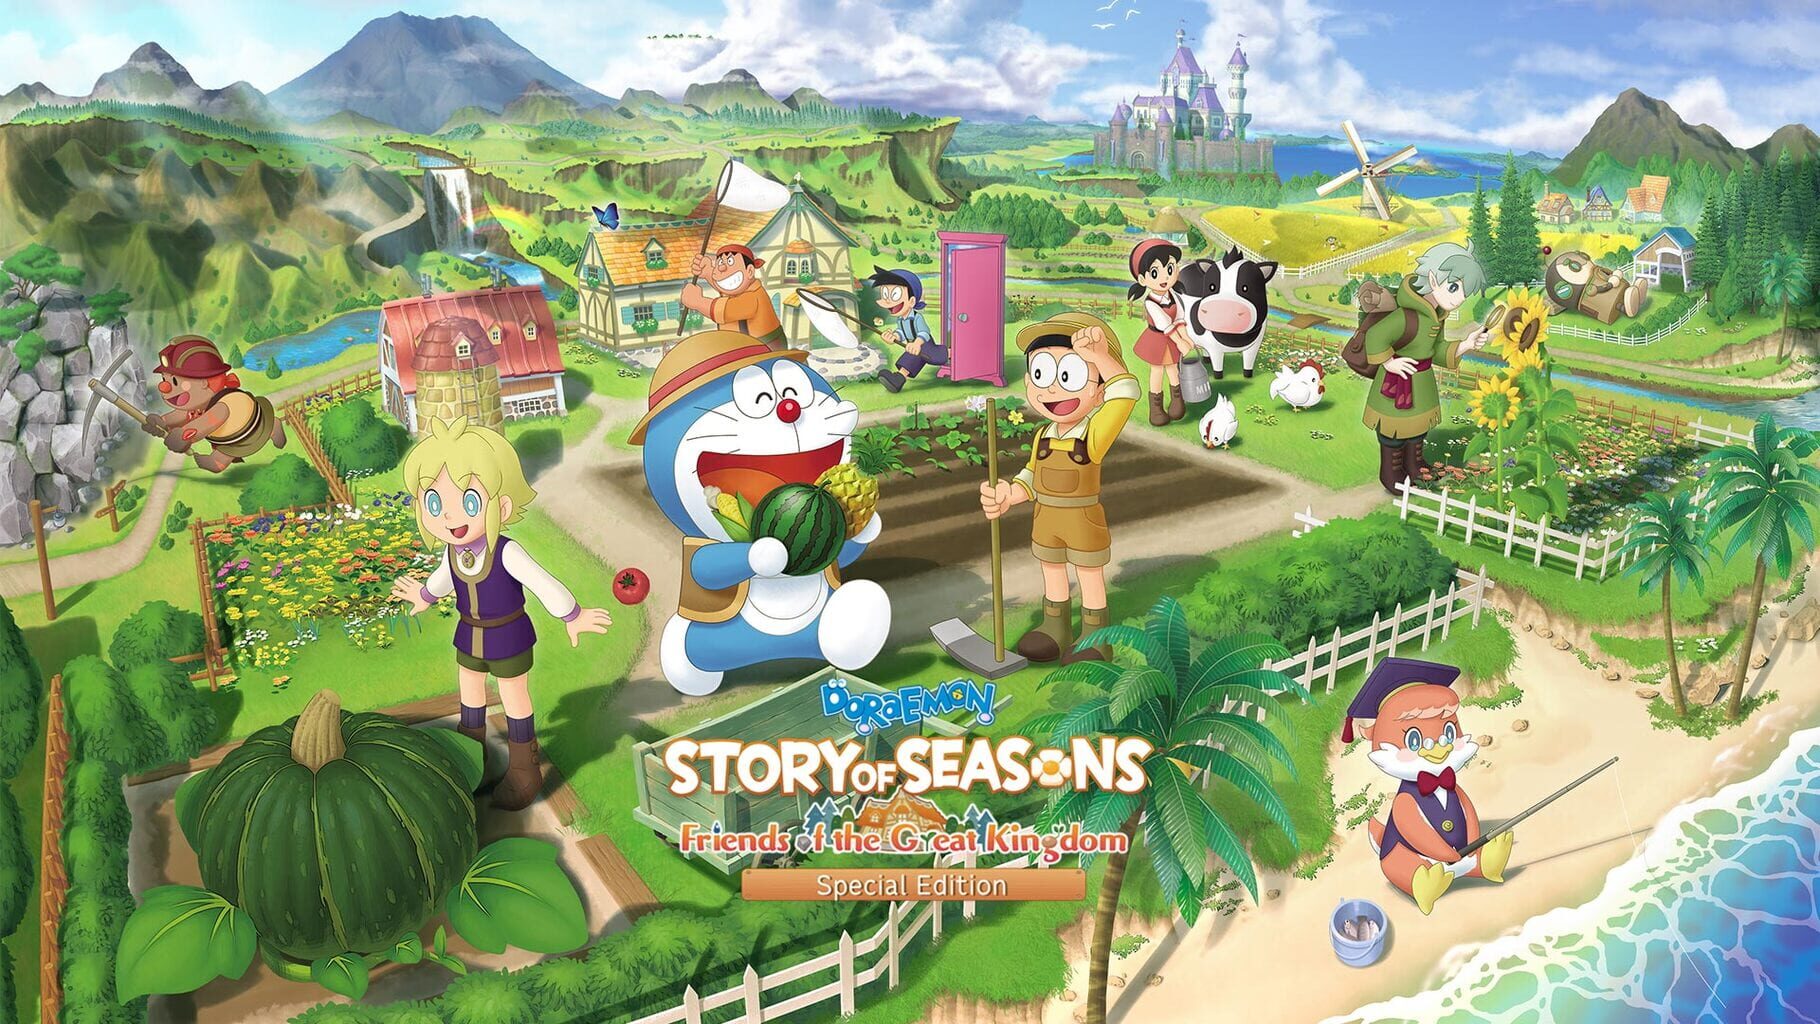 Doraemon Story of Seasons: Friends of the Great Kingdom - Special Edition artwork